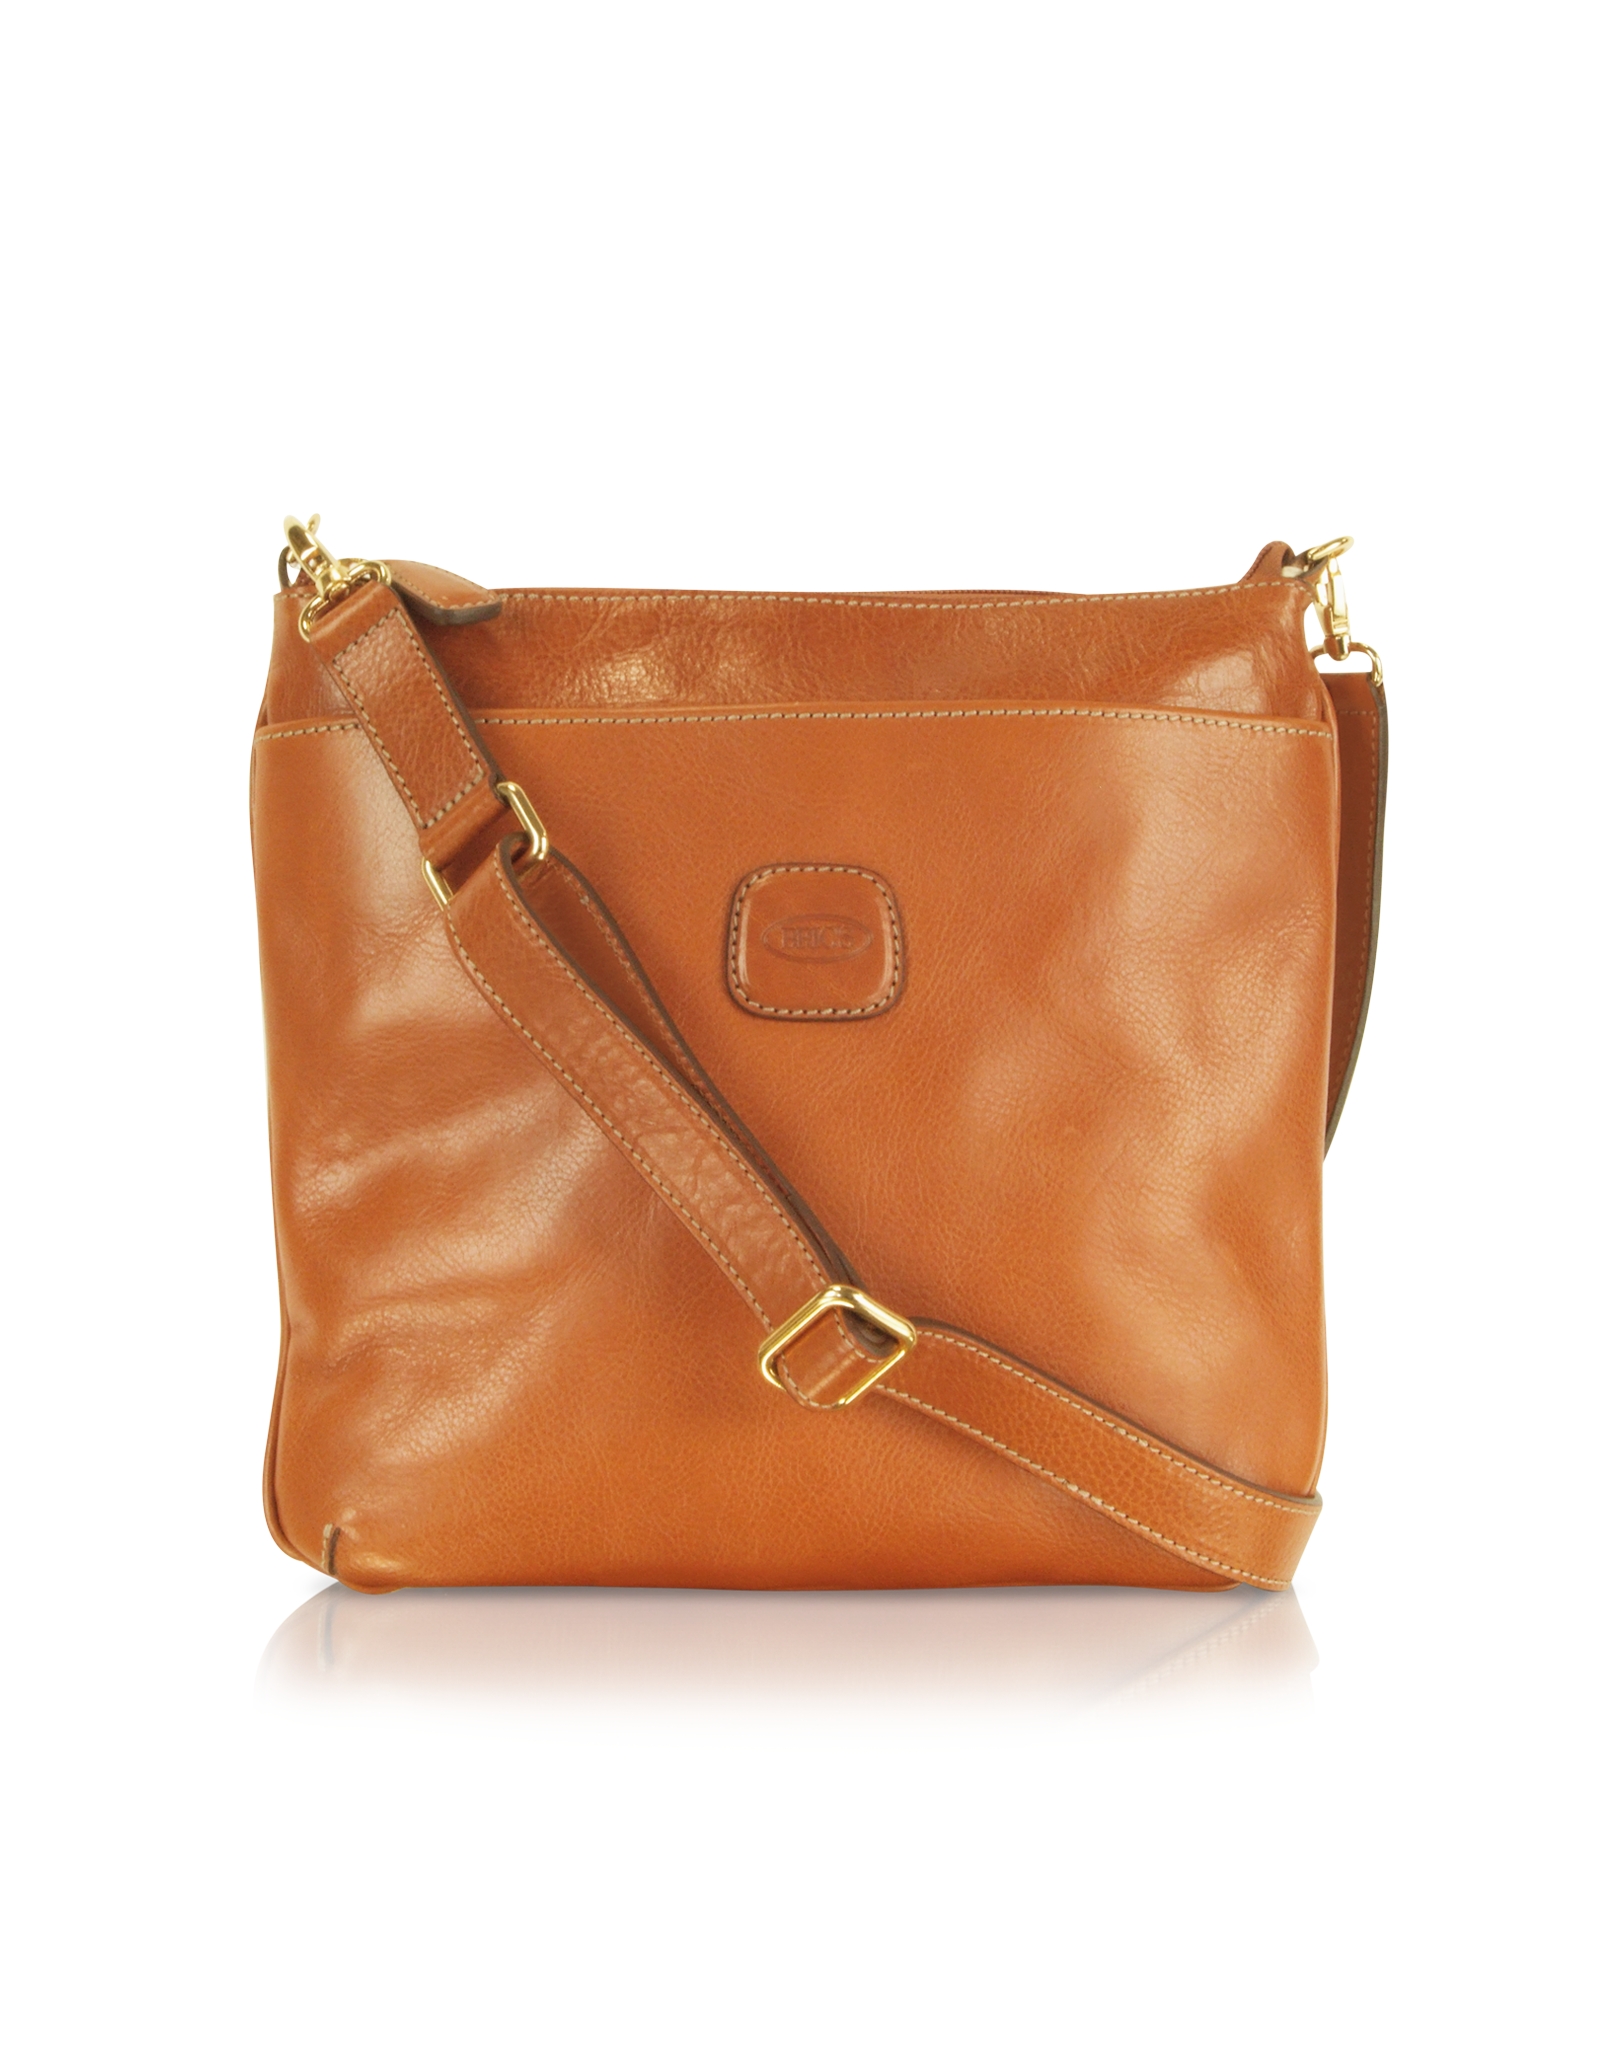 Lyst - Bric's Life Leather - Leather Crossbody Bag in Brown